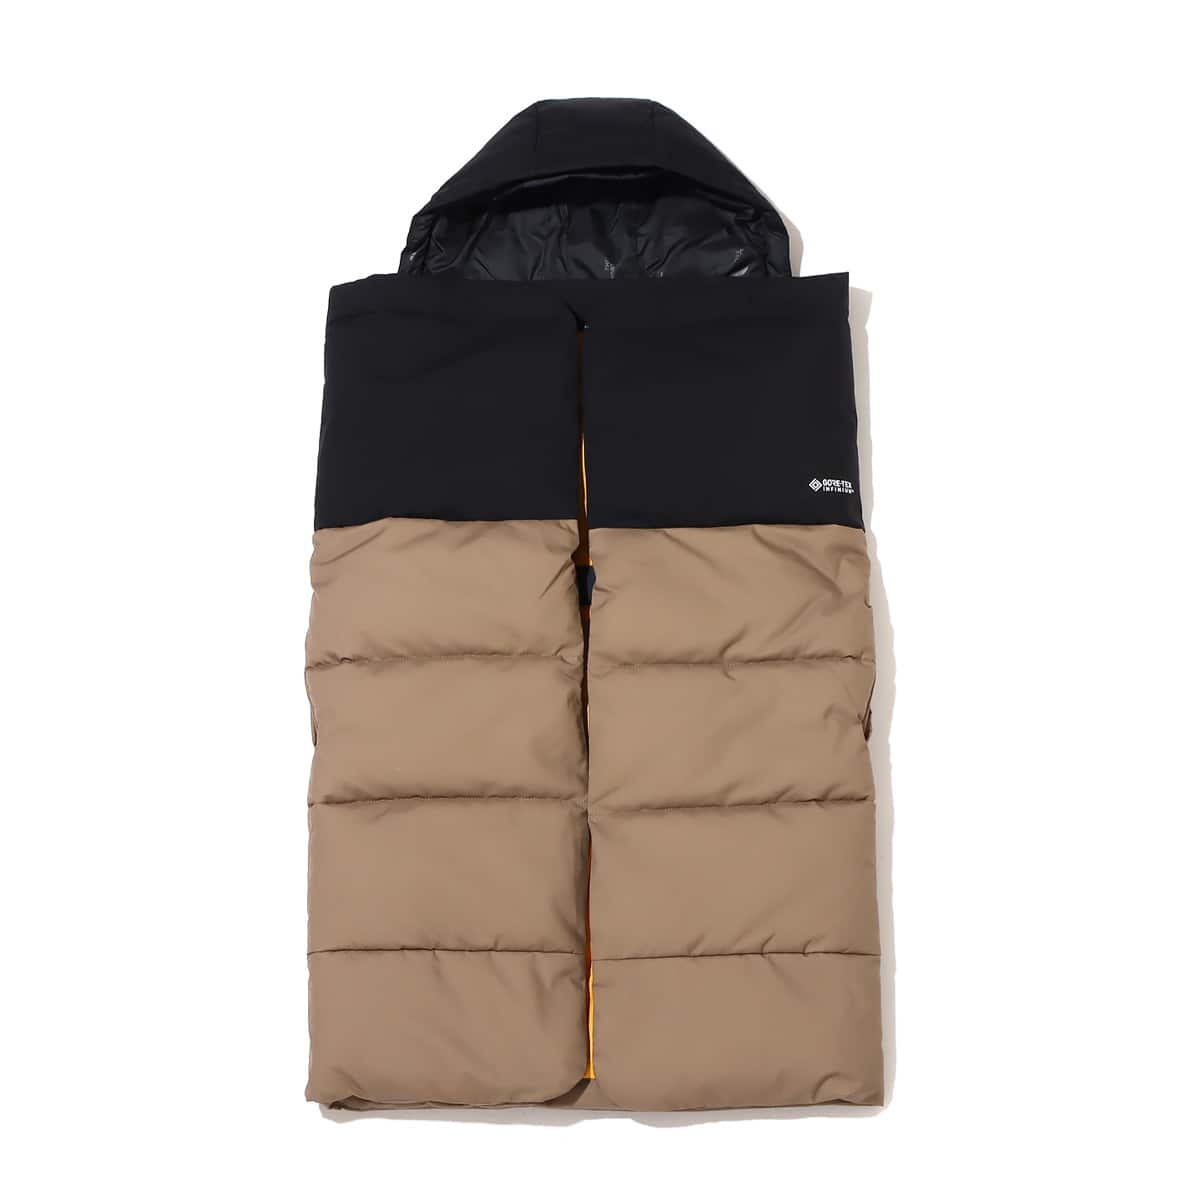 THE NORTH FACE BABY MULTI SHELL BLANKET ウォルナット 22FW-I